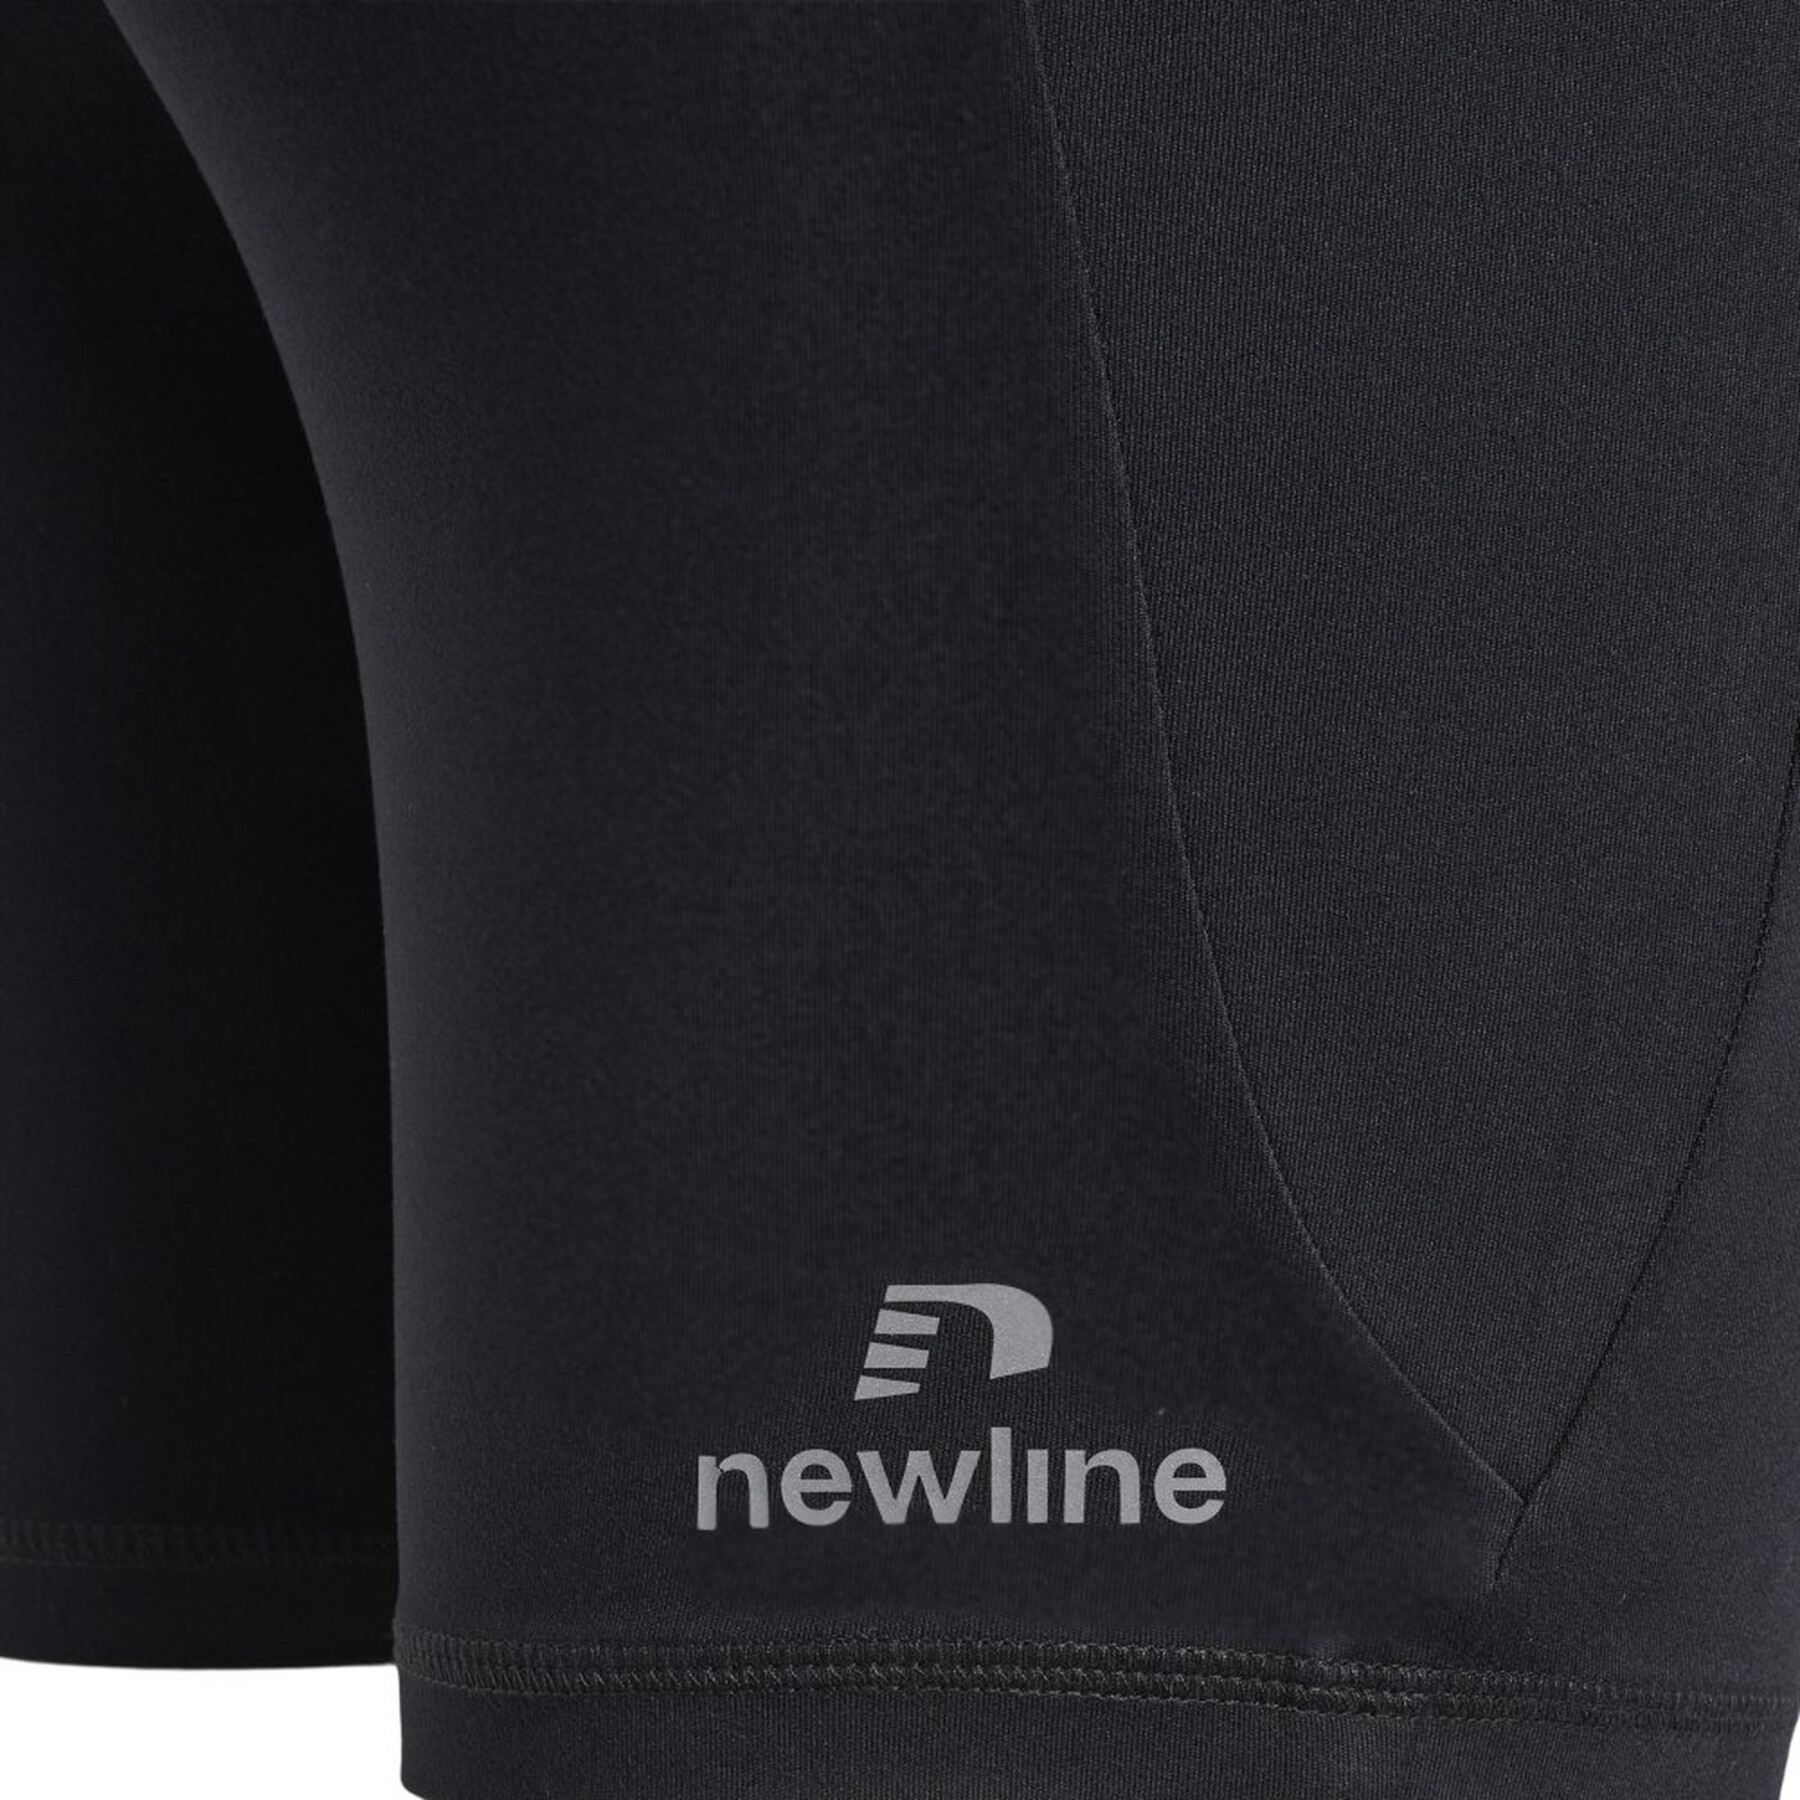 Women's thigh-high boots Newline Athletic sprinters